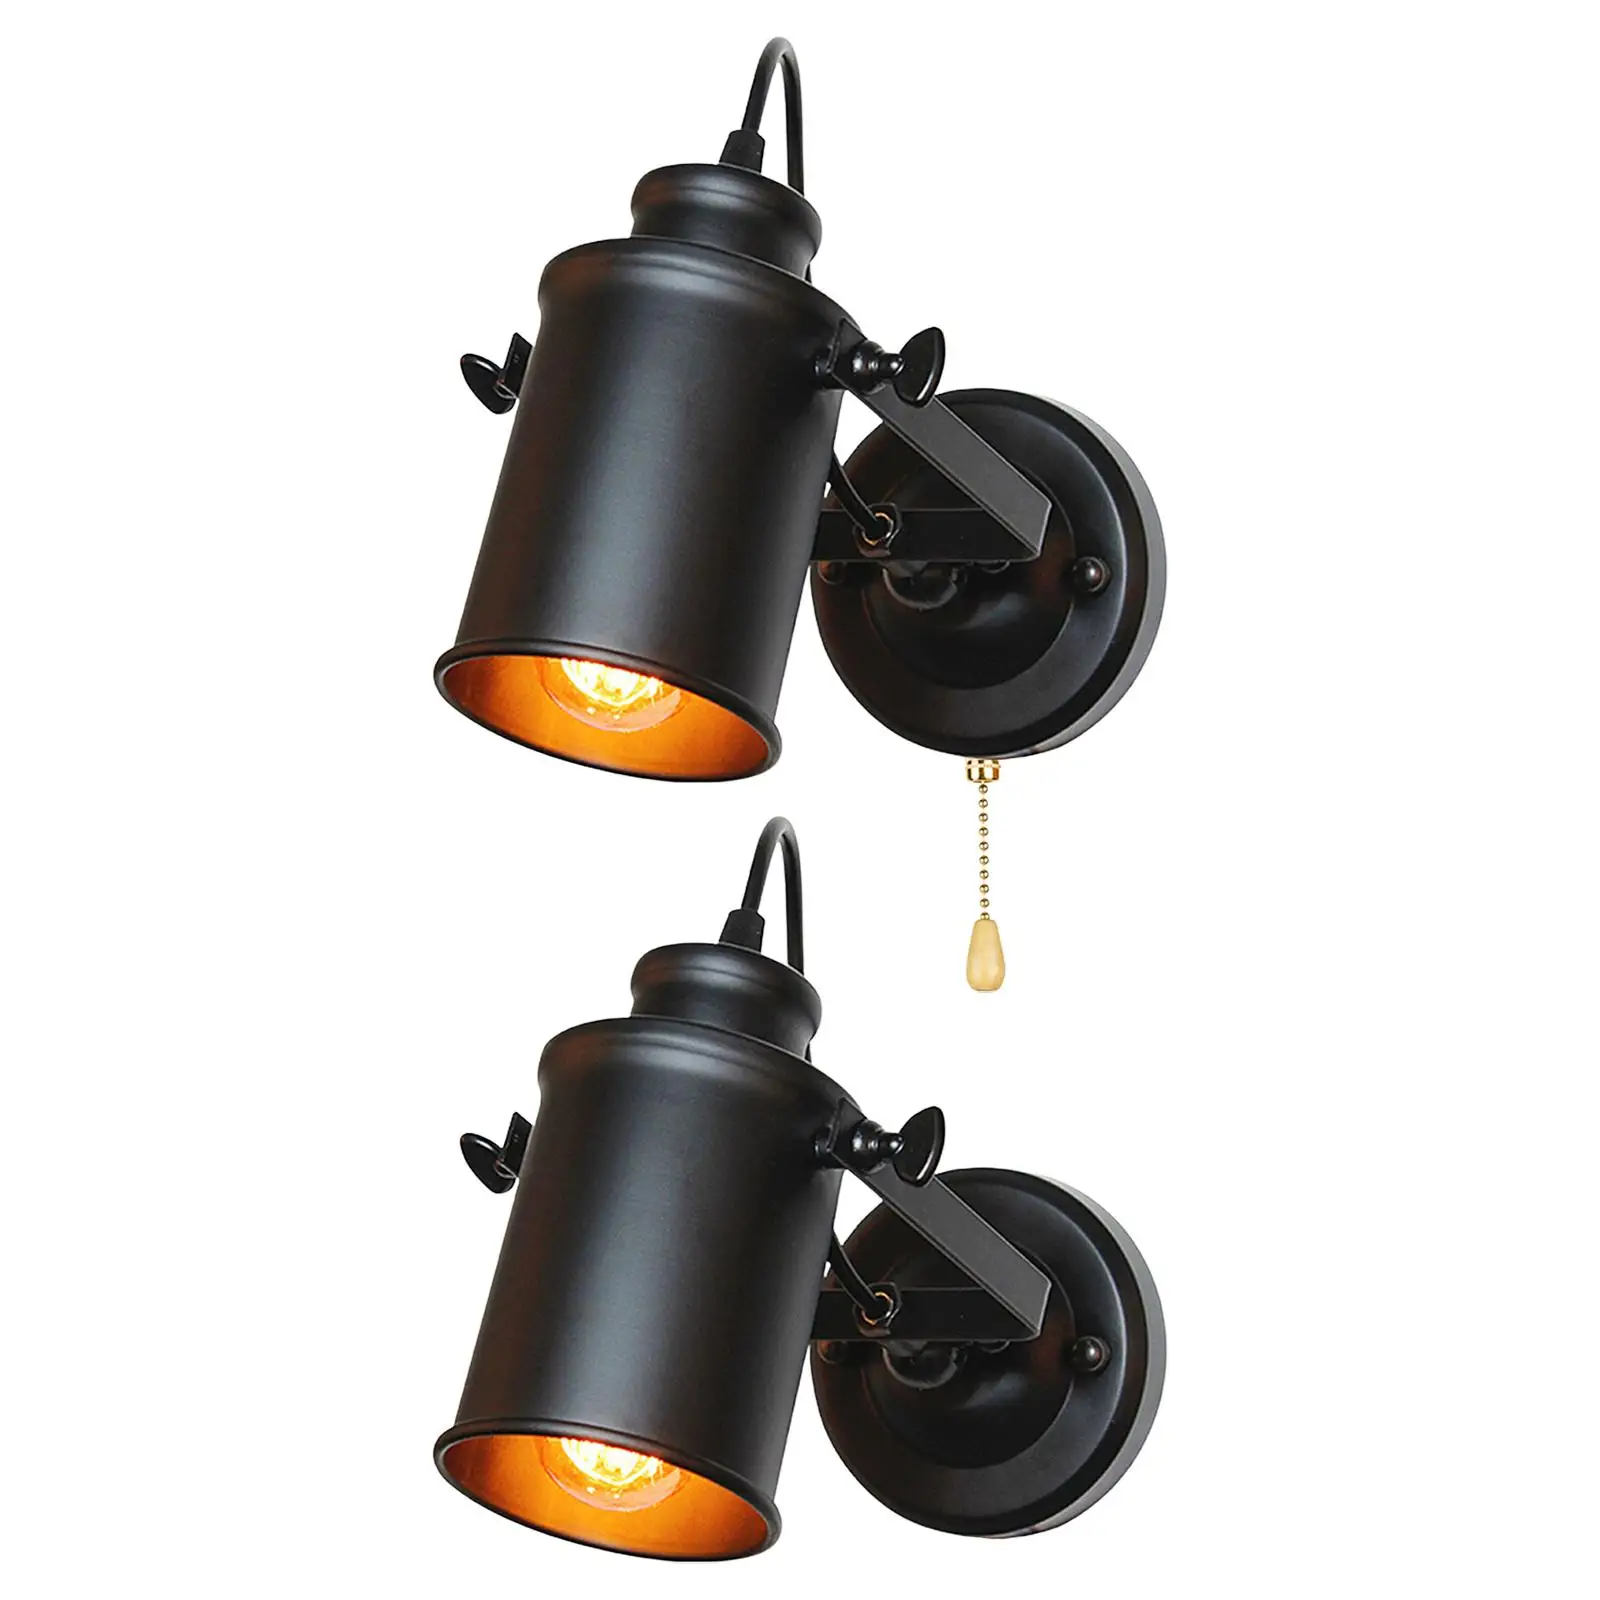 Industrial Wall Sconce Downlight Hardwired Wall Lamp for Restaurant Bathroom